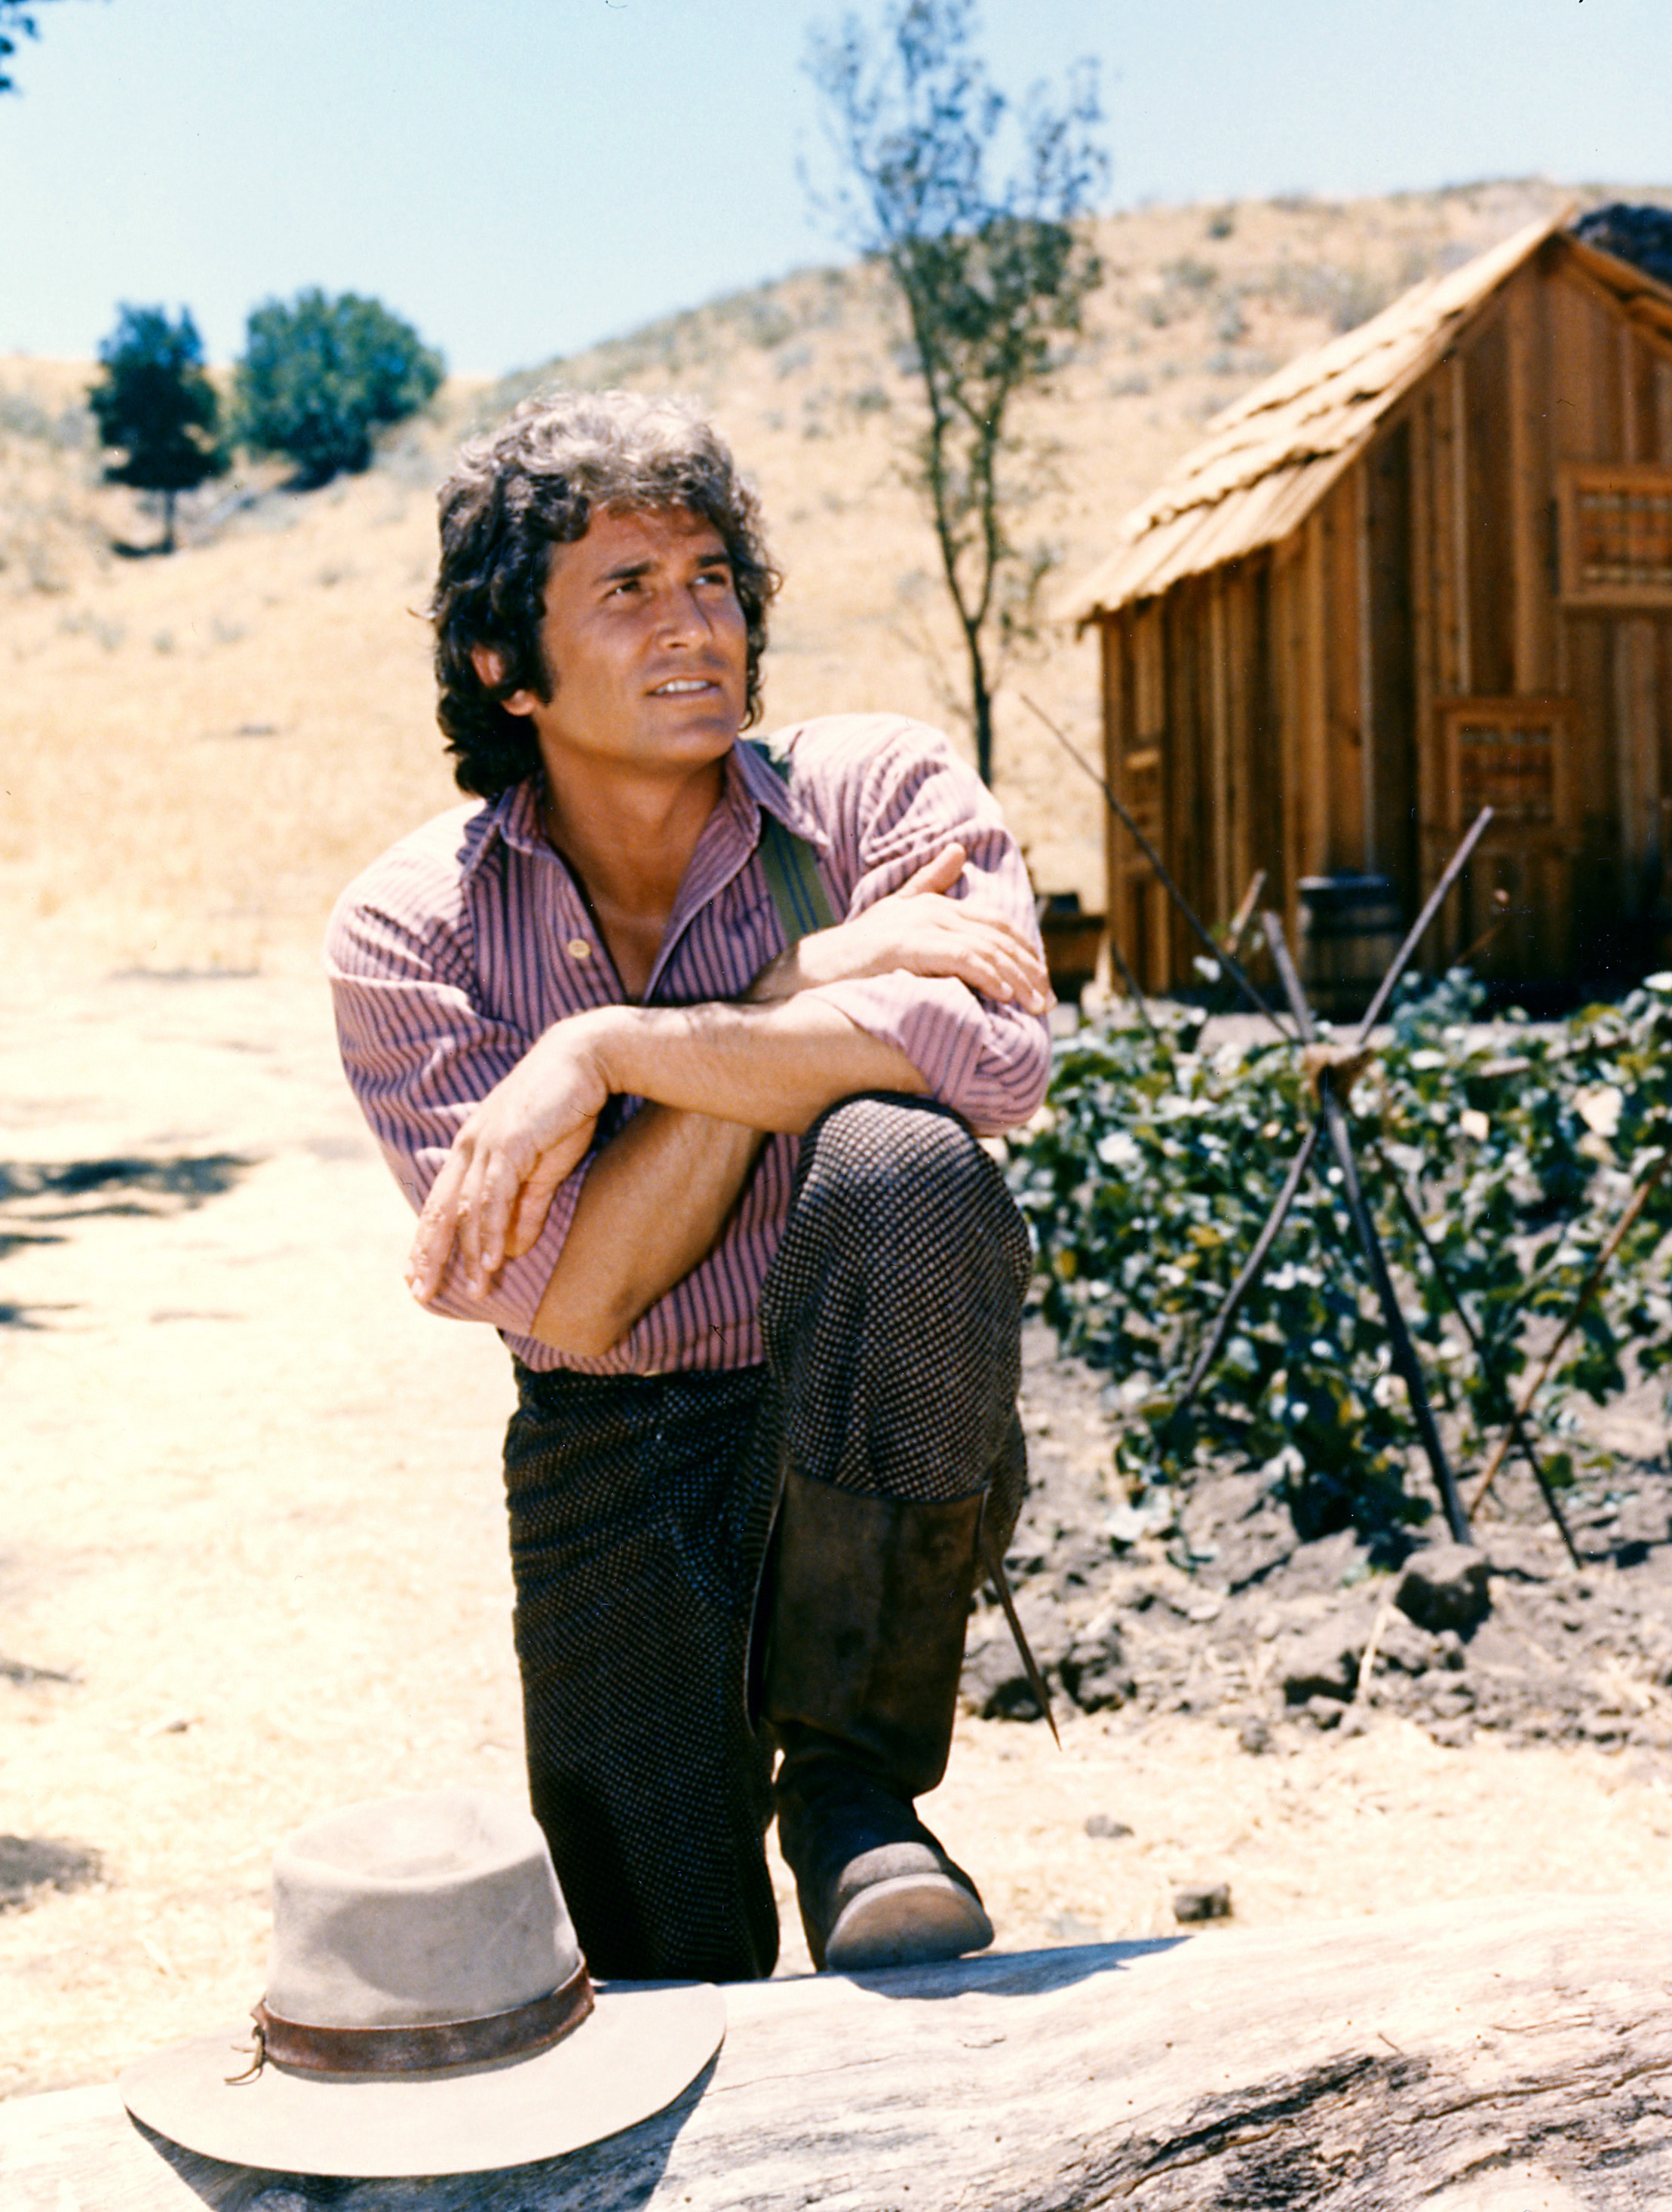 Michael Landon poses with his arms crossed and resting on his knee with a log cabin in the background in a portrait for the US television series, 'Little House on the Prairie,' circa 1974. | Source: Getty Images